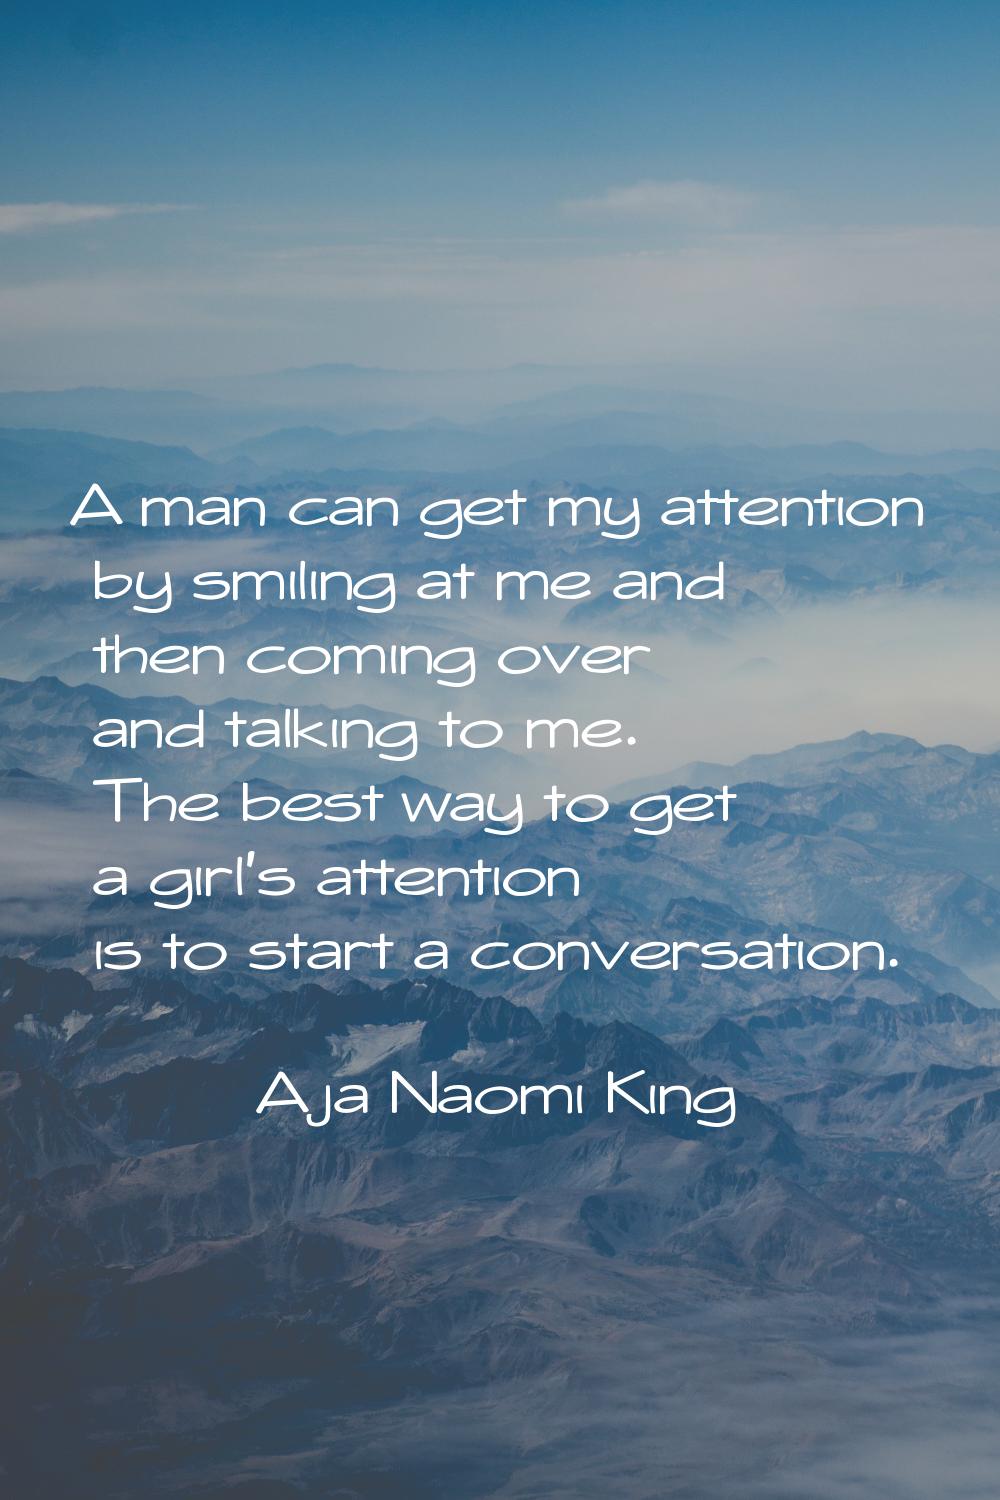 A man can get my attention by smiling at me and then coming over and talking to me. The best way to